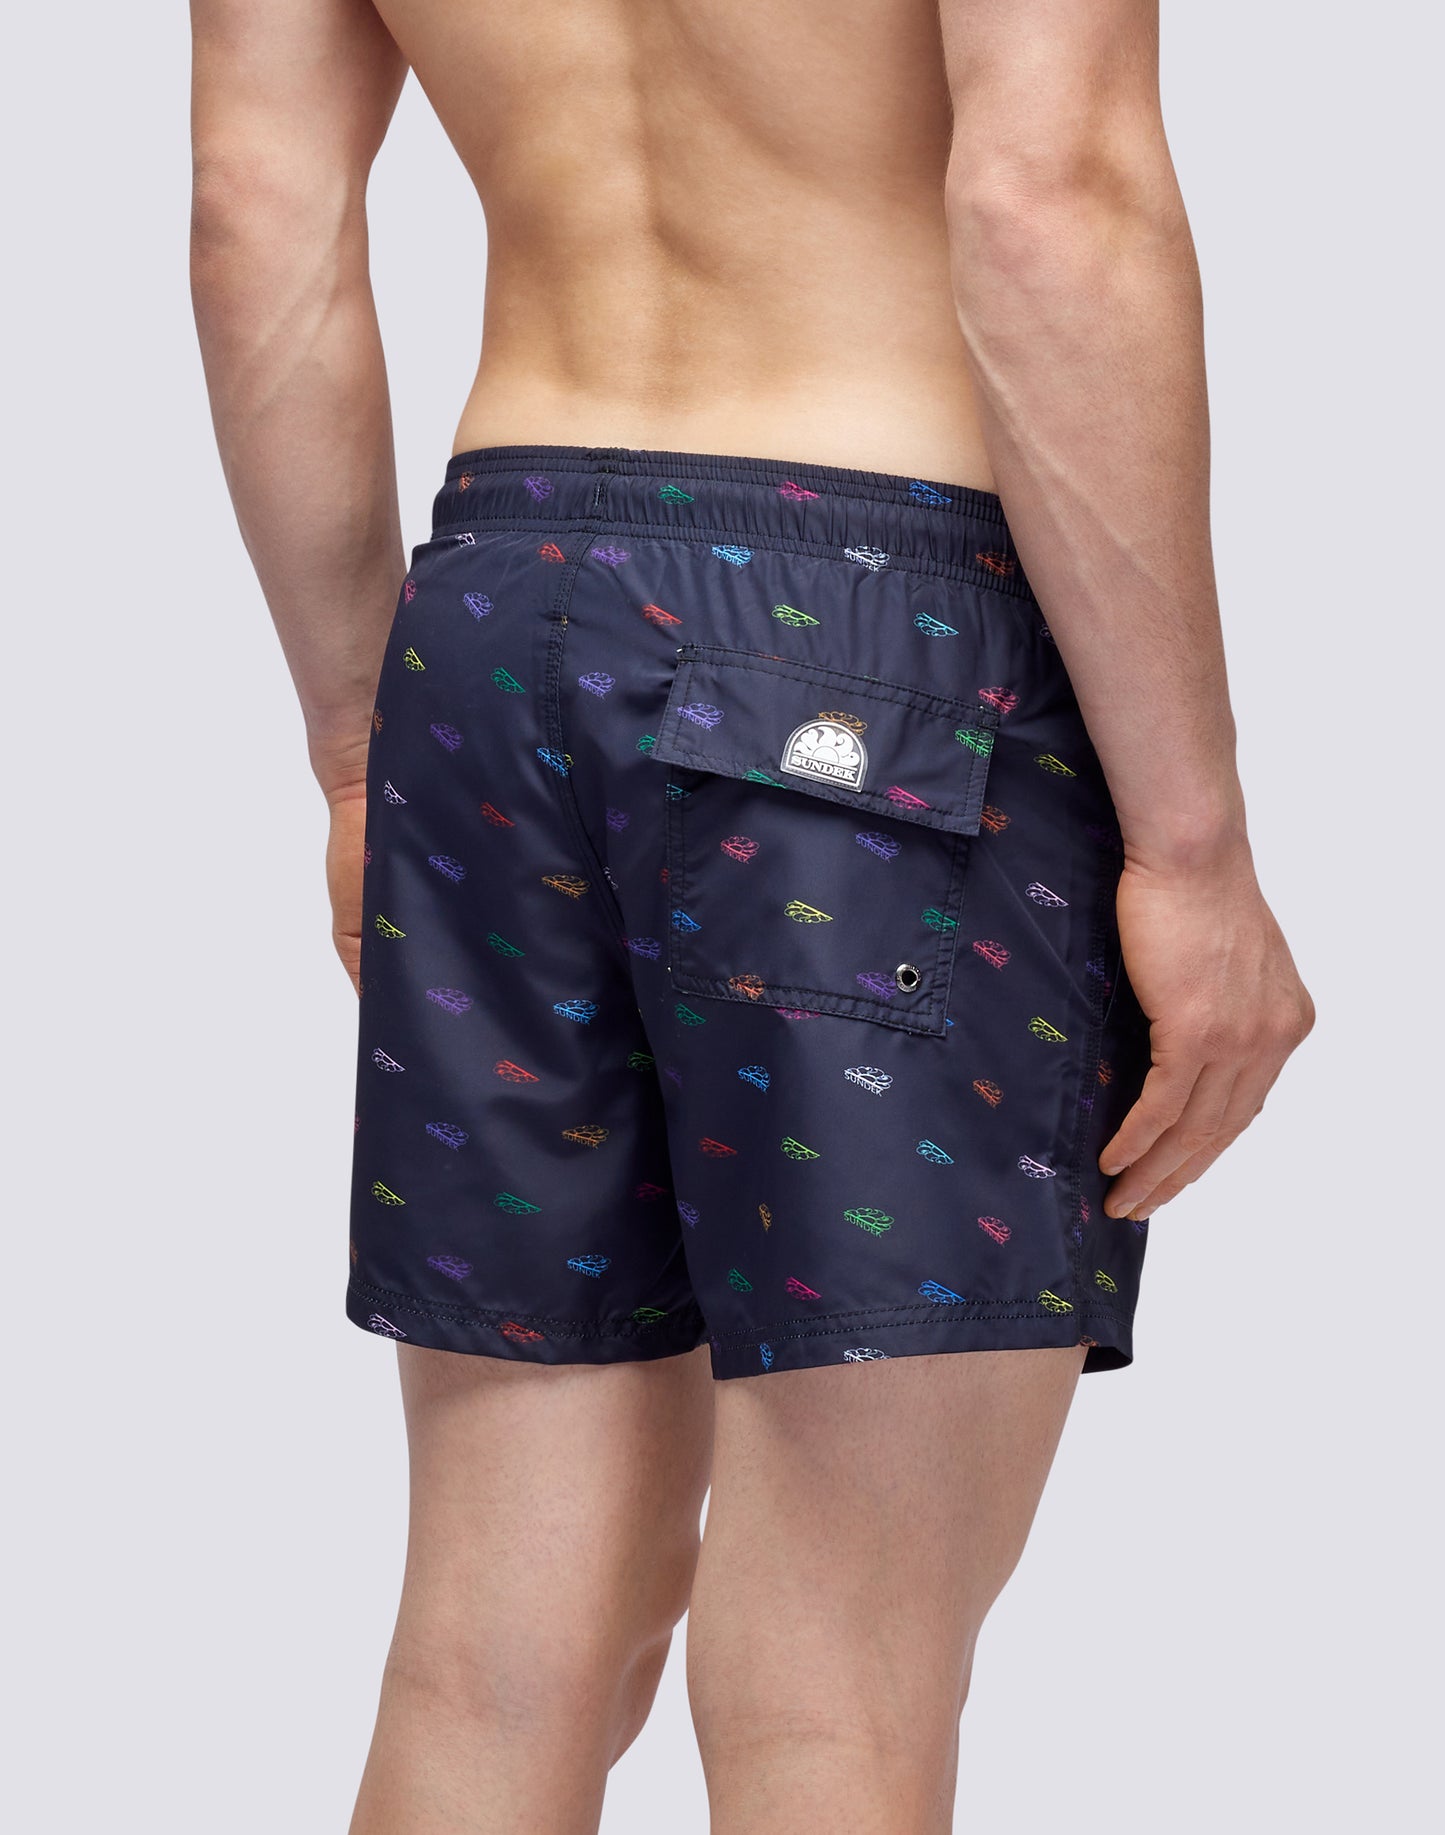 RECYCLED POLY SHORT SWIMSHORTS WITH ELASTIC WAIST MONOGRAM PRINT 